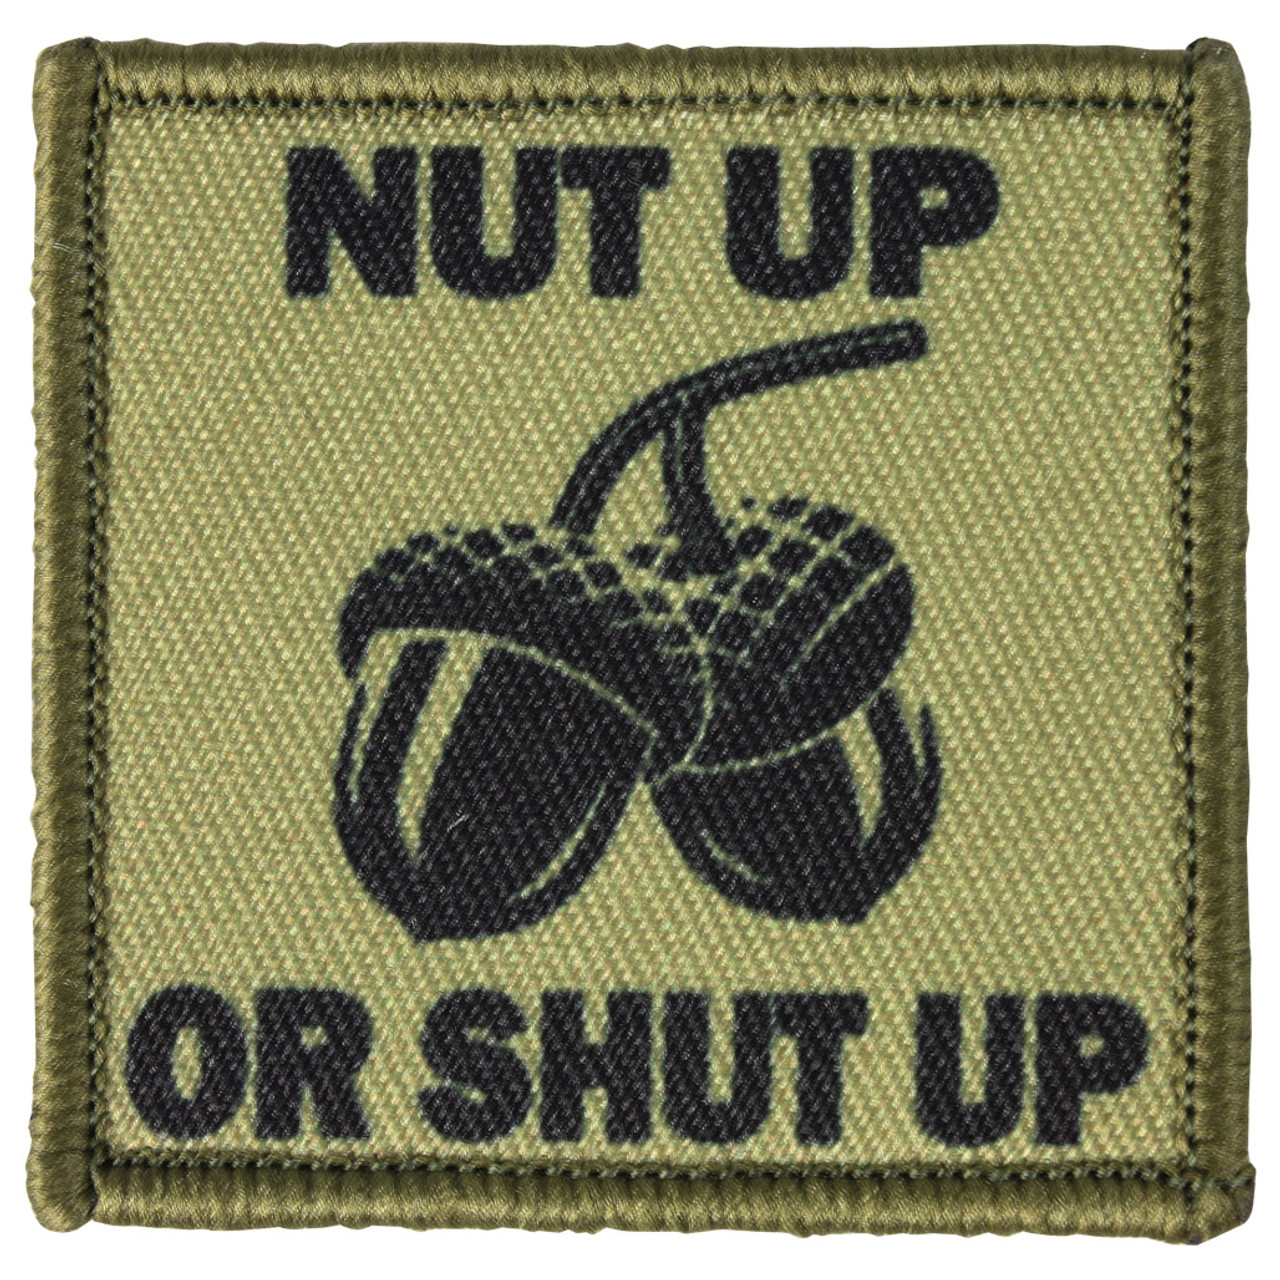 Morale Patch - Nut Up Or Shut Up